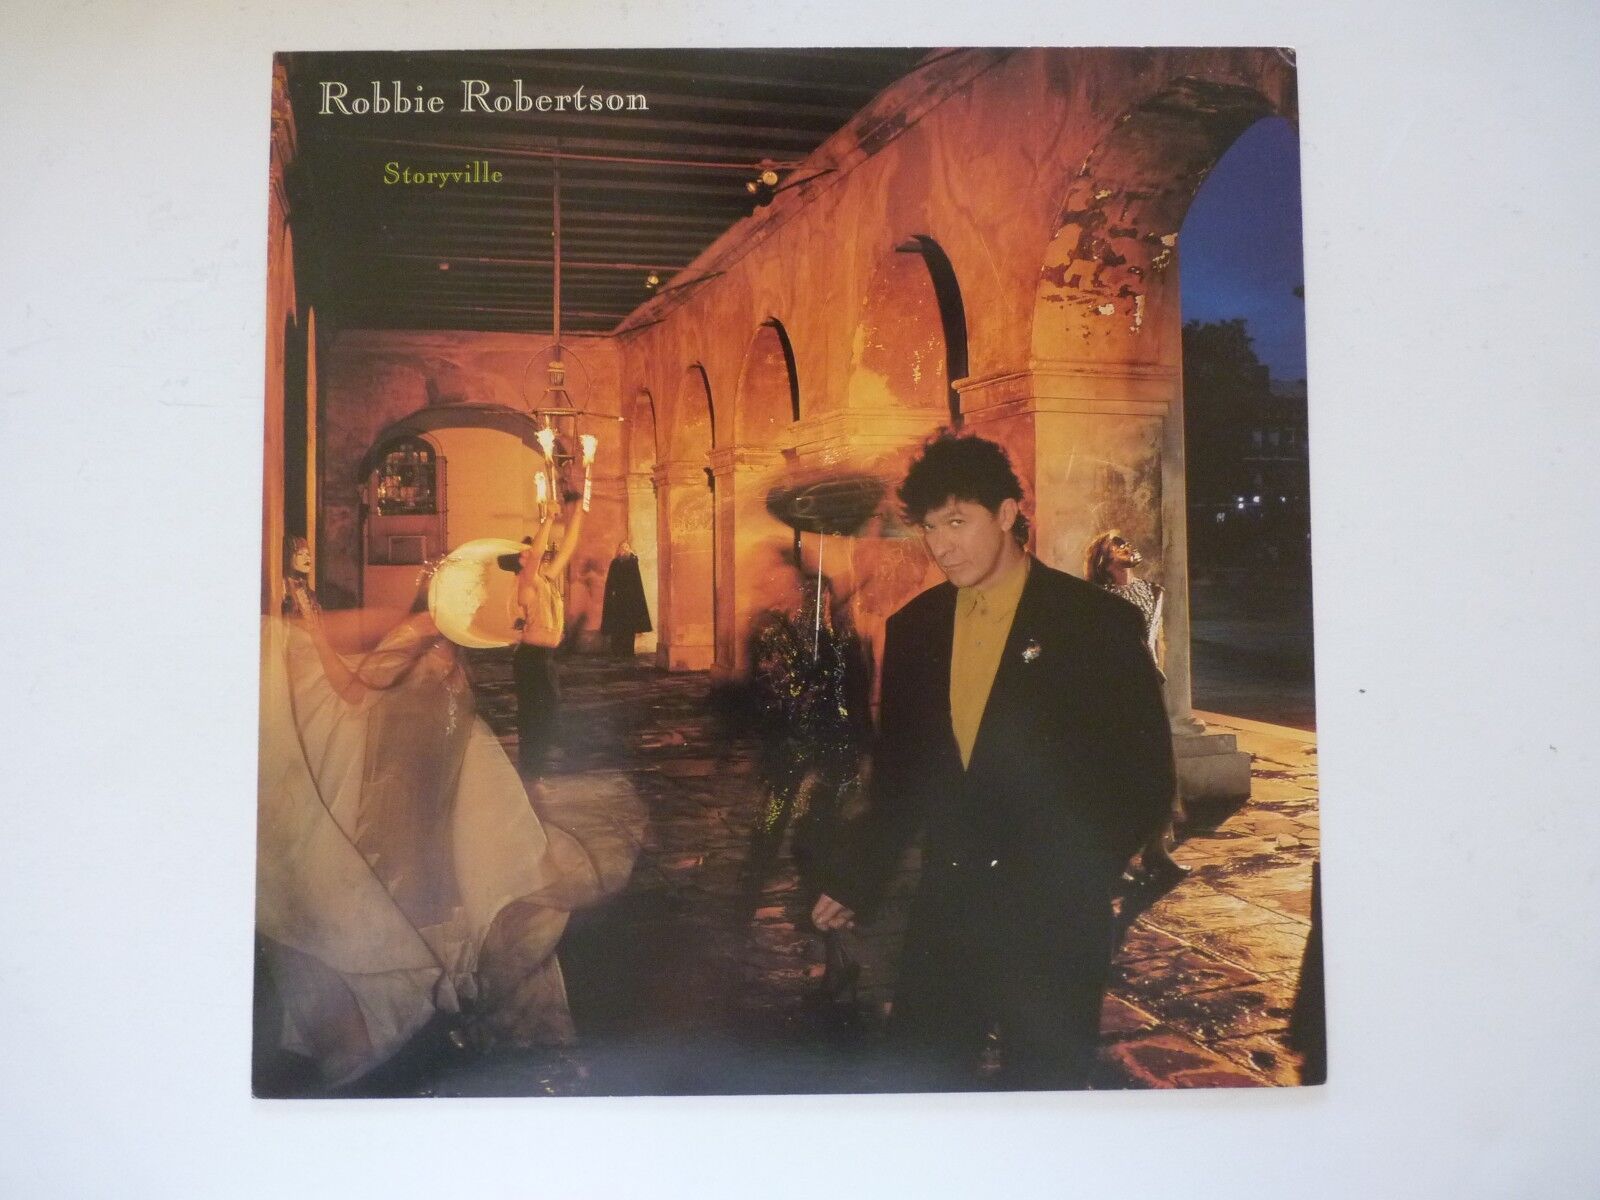 Robbie Robertson Storyville LP Record Photo Poster painting Flat 12x12 Poster